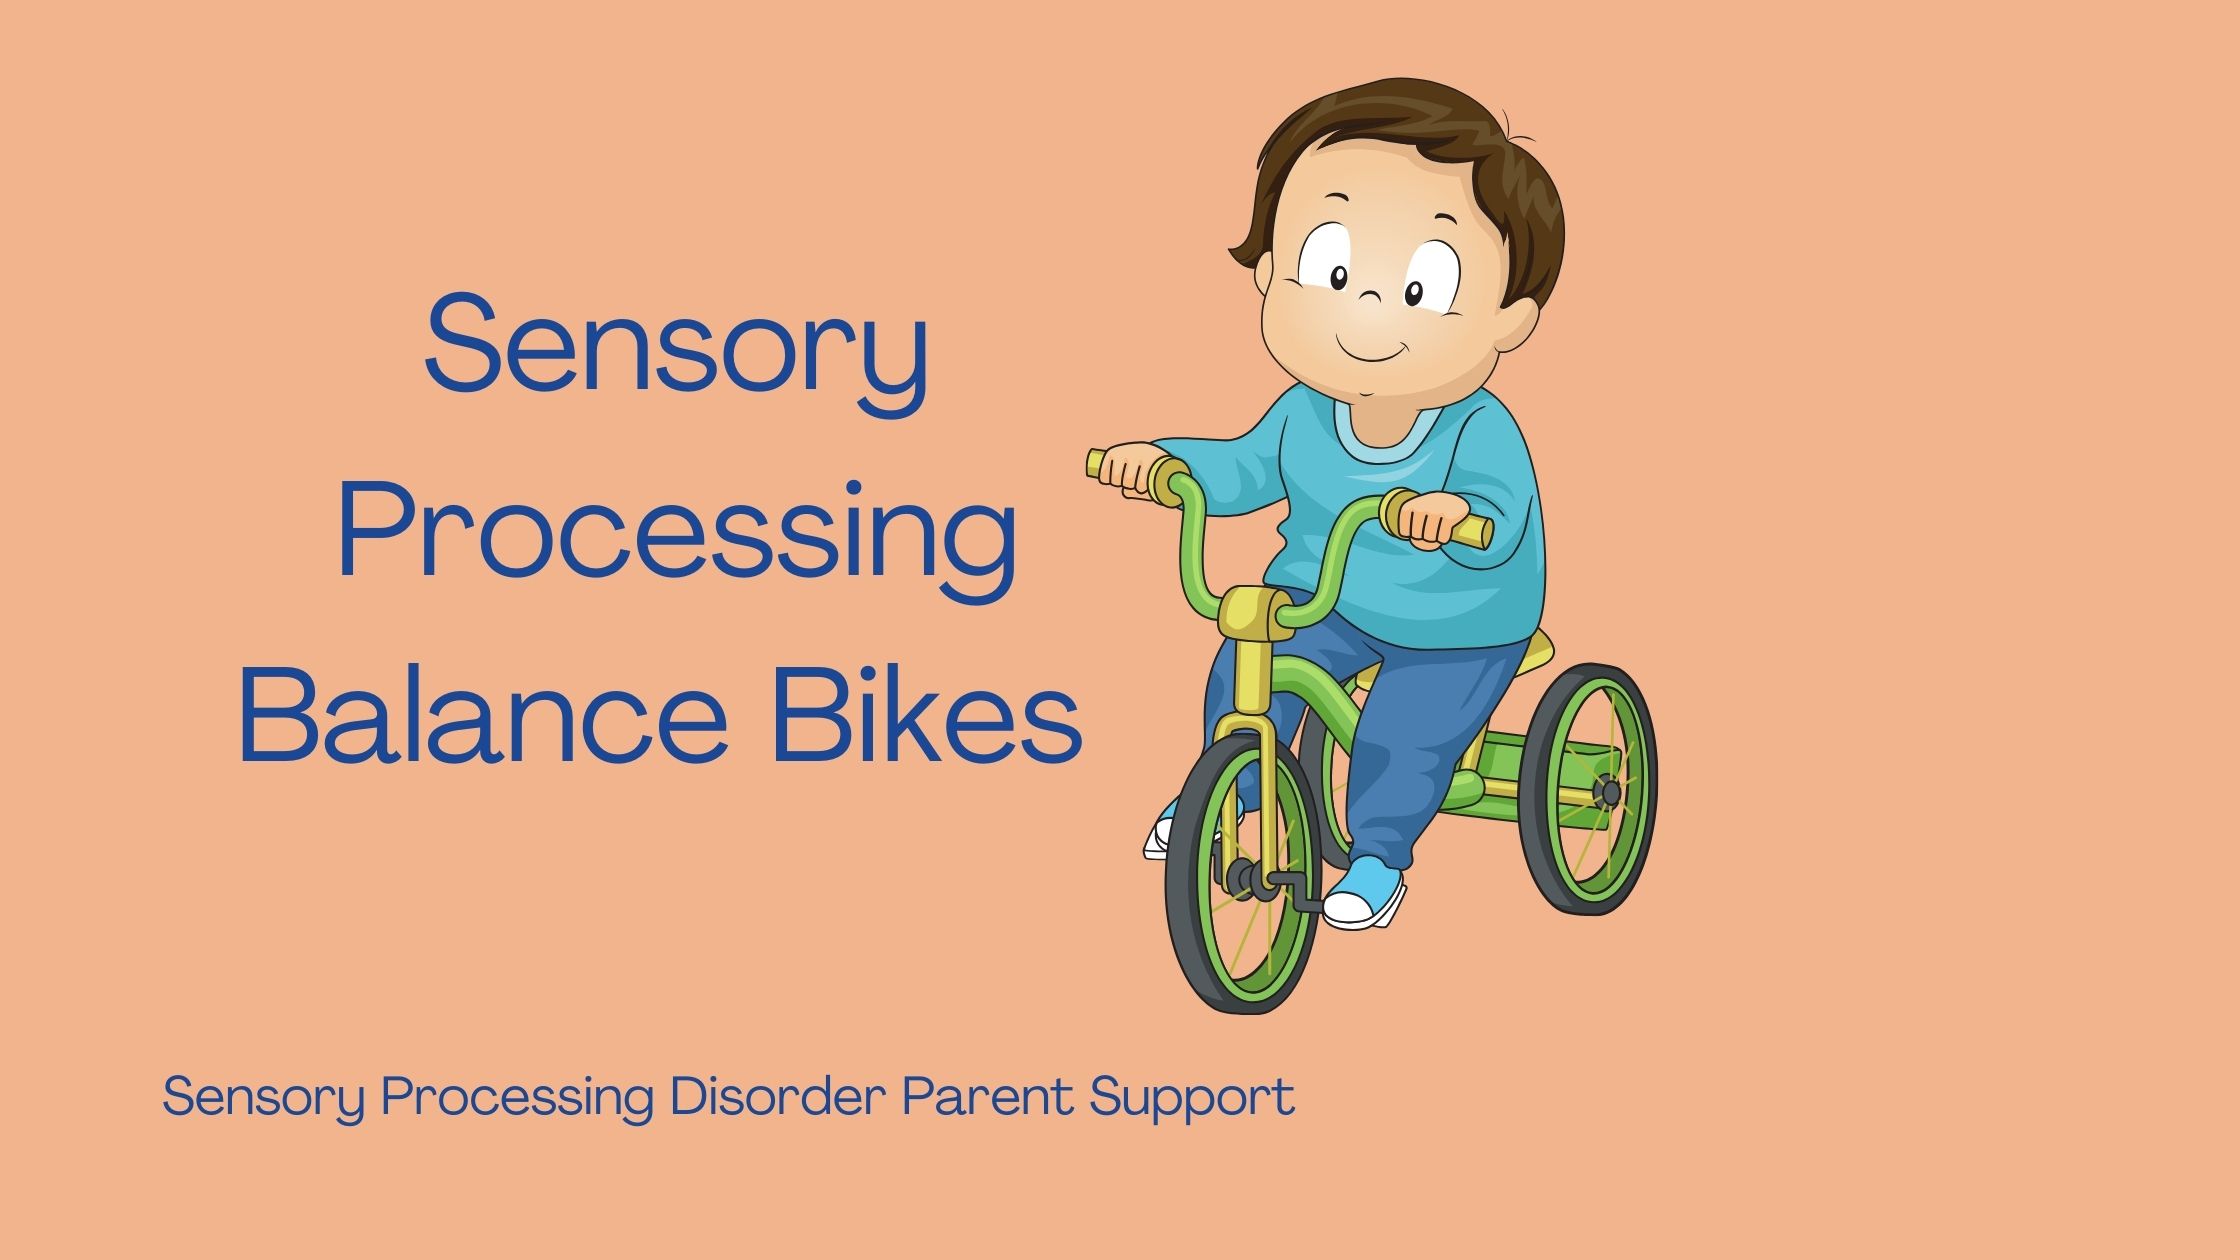 child with sensory processing disorder on a balance bike Sensory Processing Balance Bikes